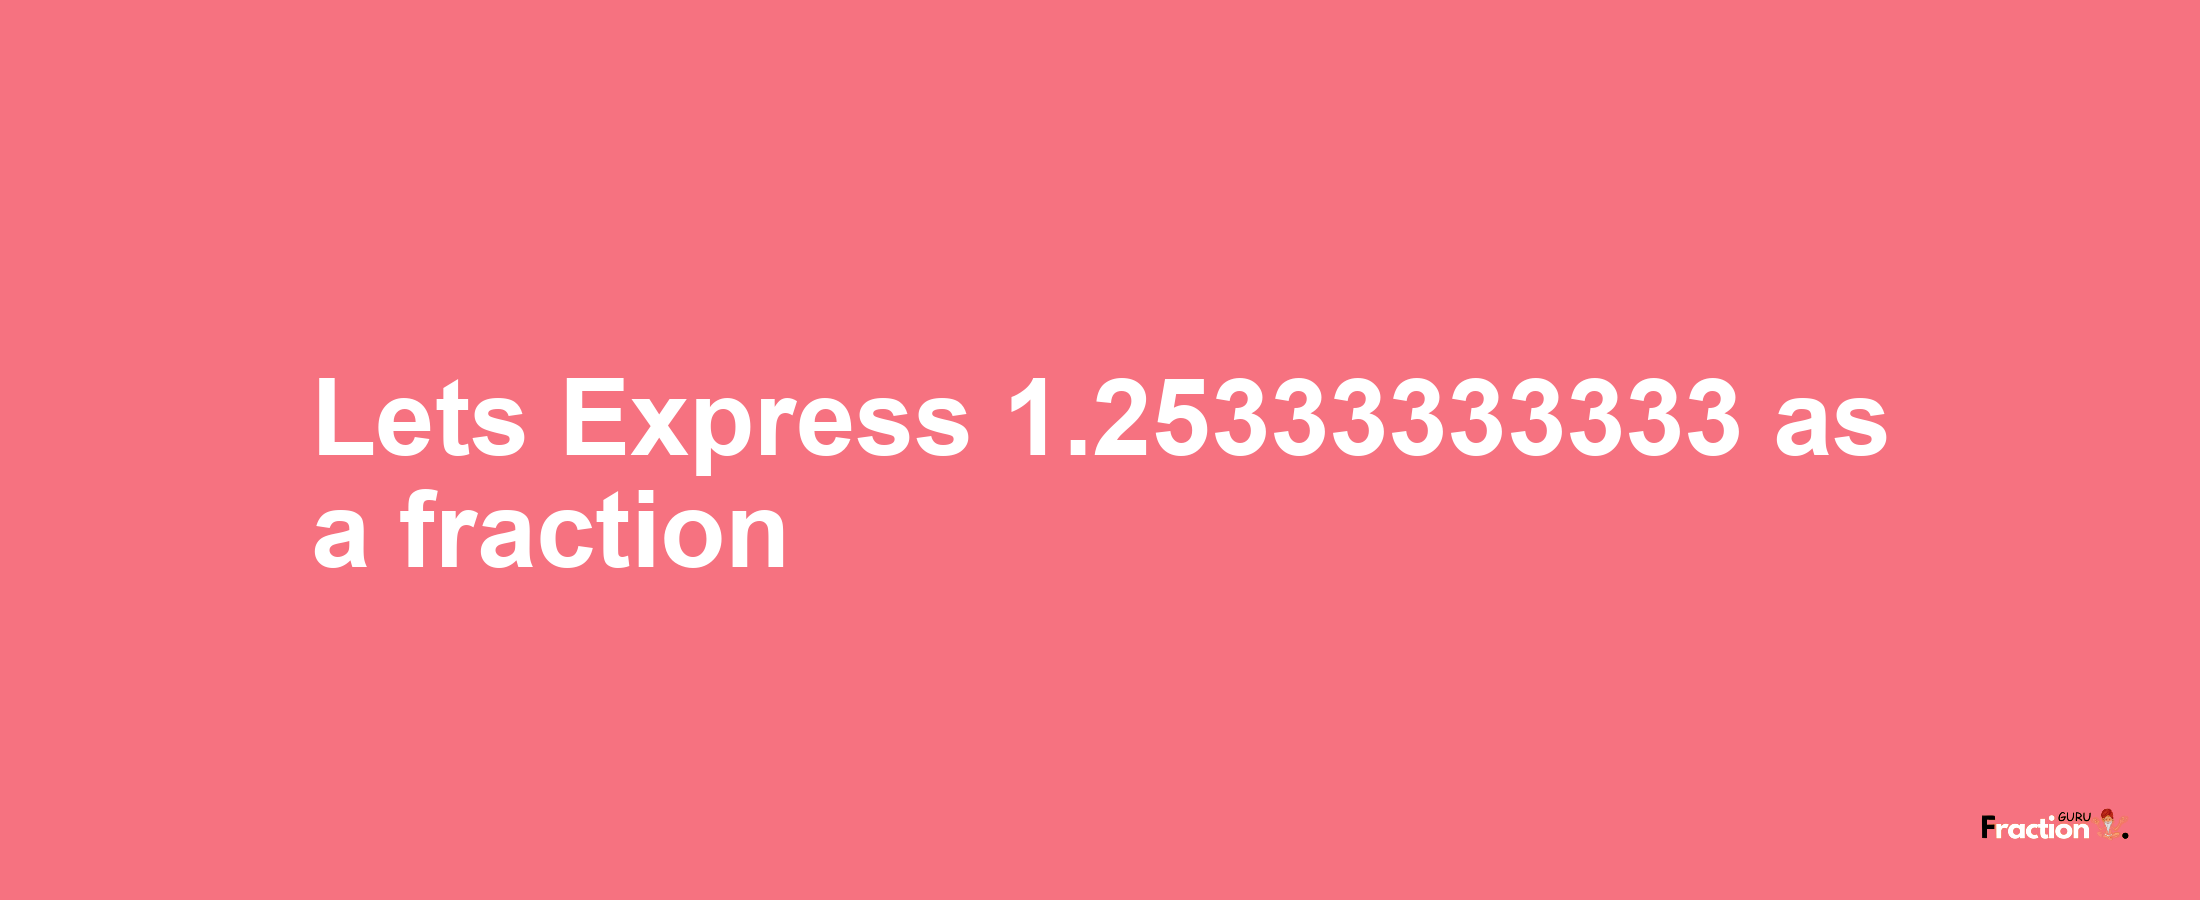 Lets Express 1.25333333333 as afraction